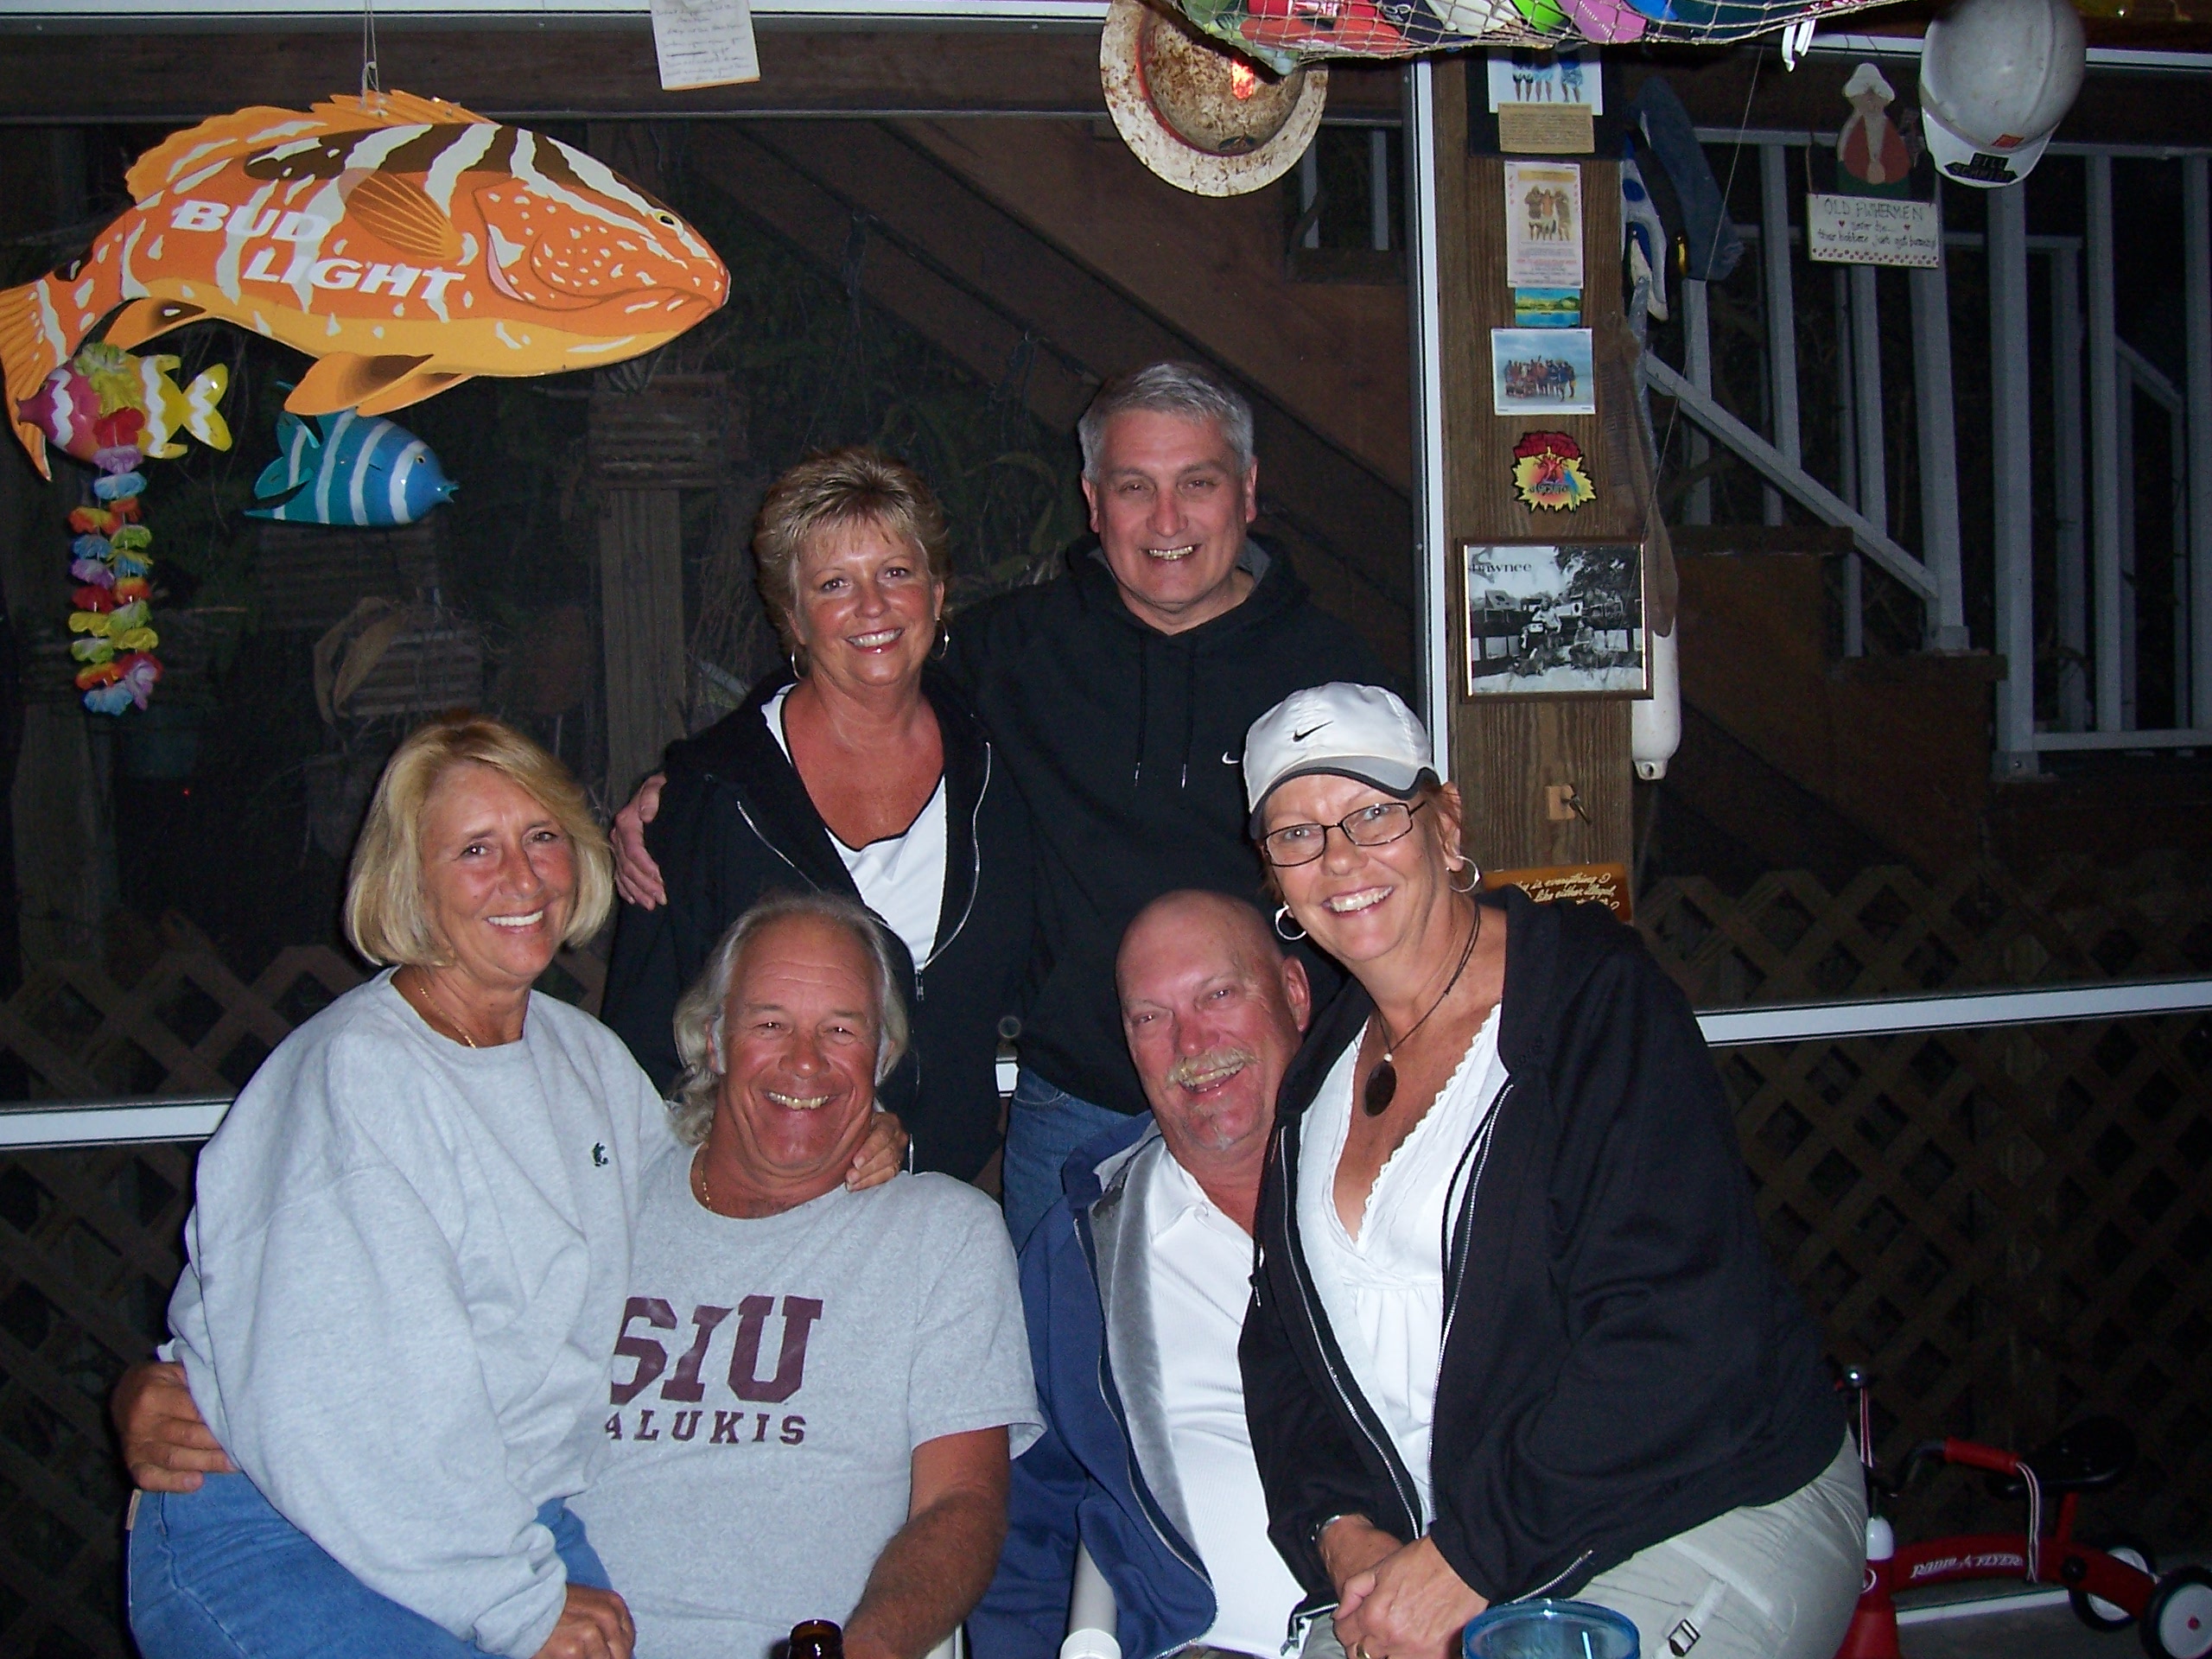 Bill and Betty (LaBarr)Schmidt, Randy and Nancy (Triggs) Page and Debbie (Stodghill) Dew & Ric Olson at the 